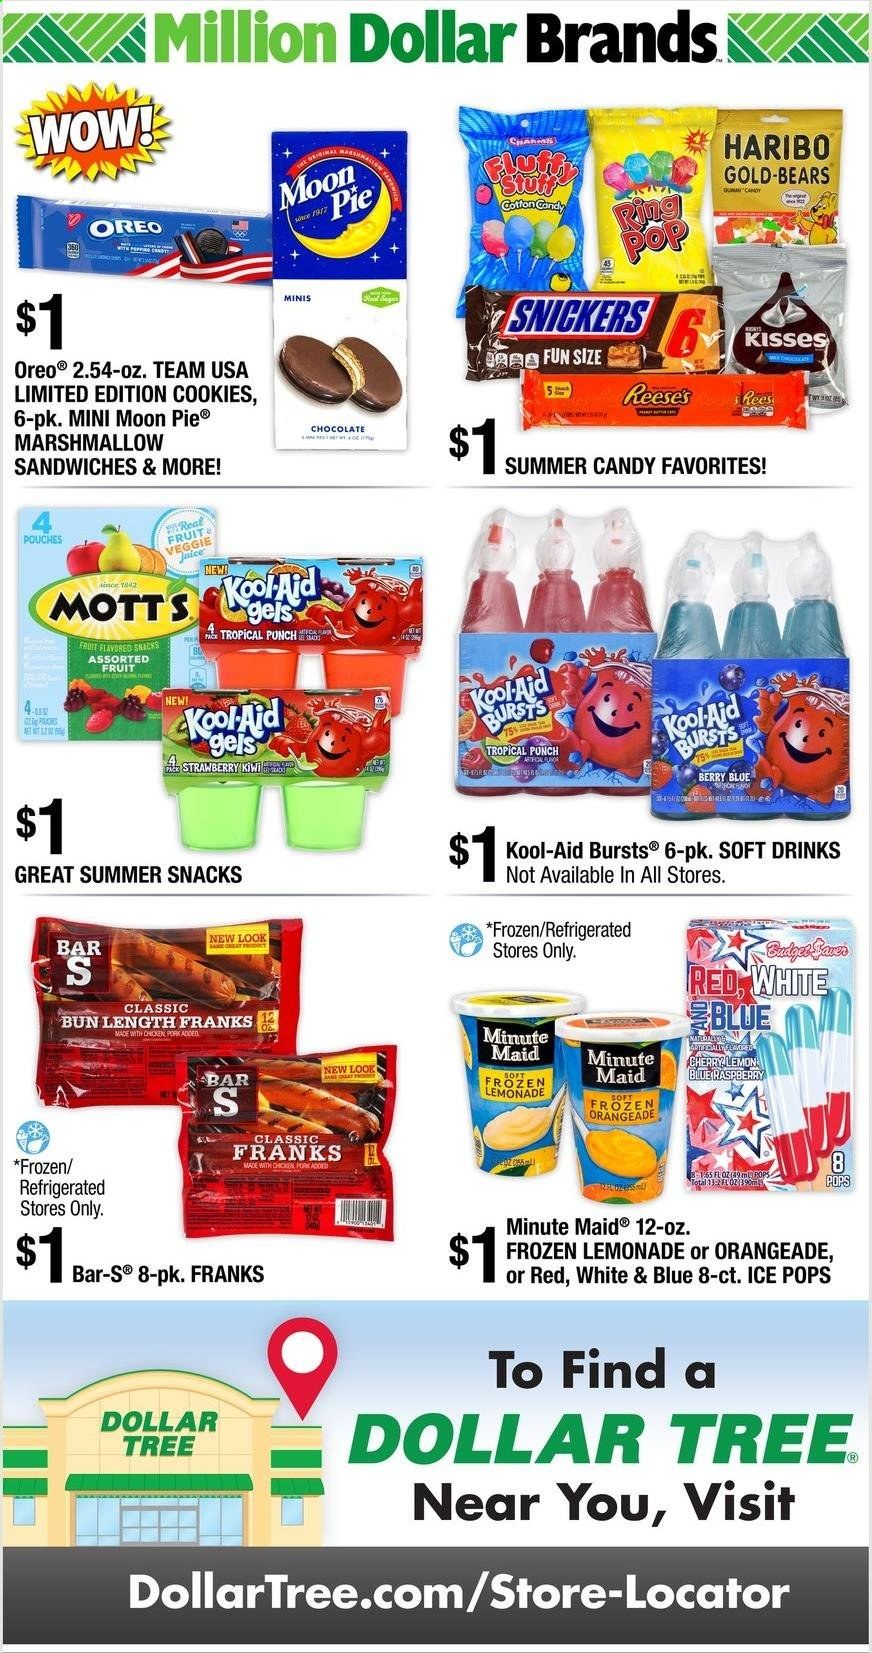 Dollar Tree Weekly Ad Flyer June 21 to July 4